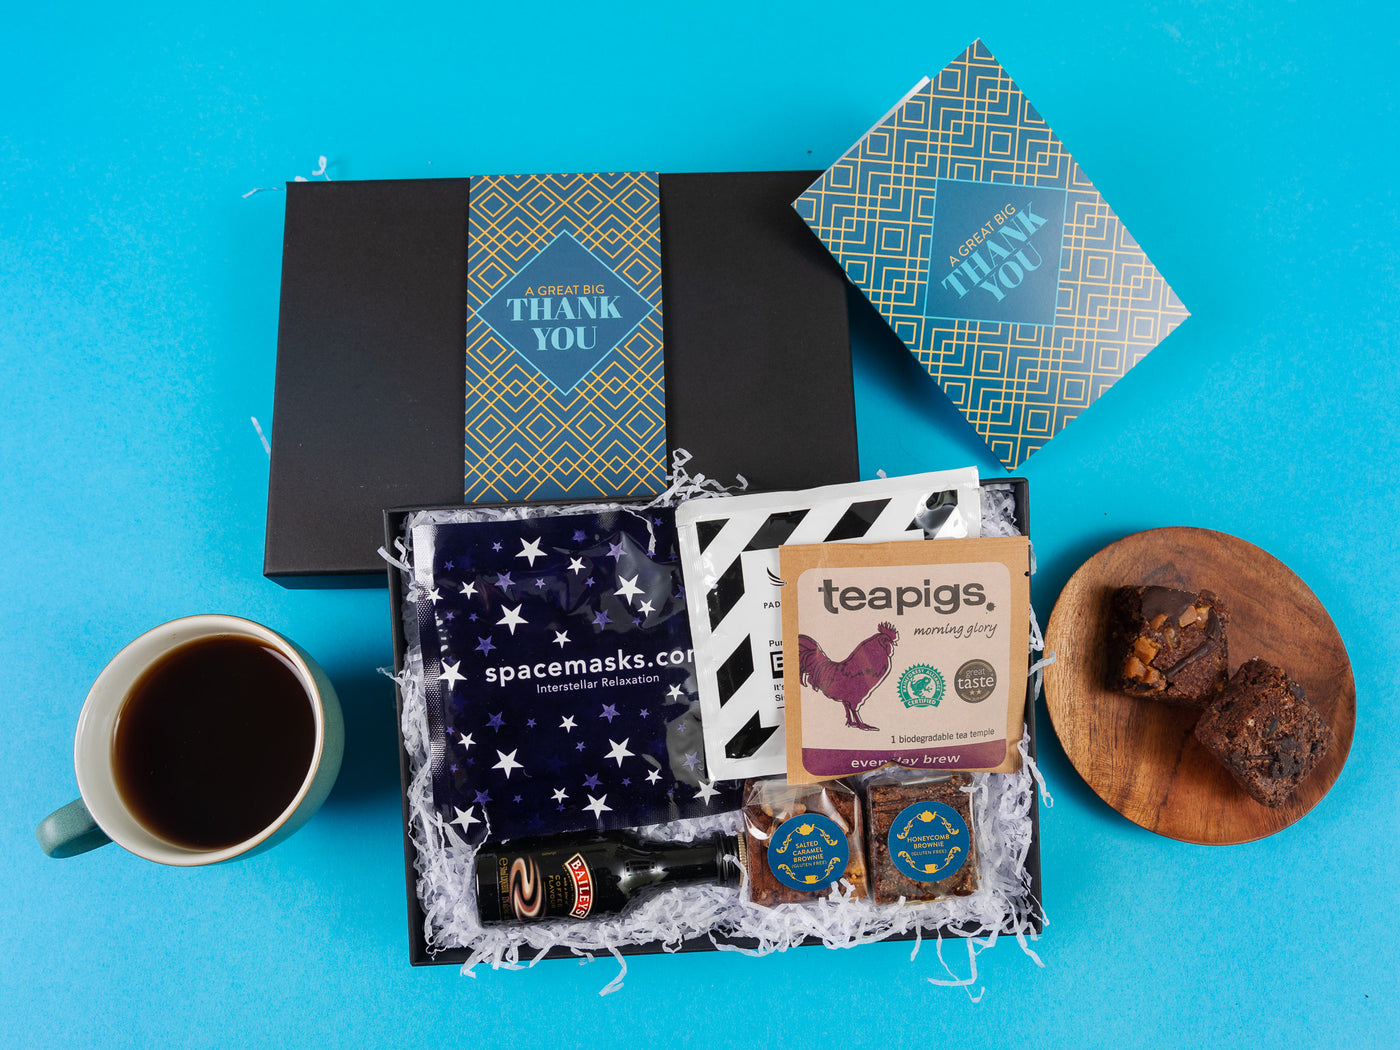 'Thank You' Wellbeing Gluten Free Gift